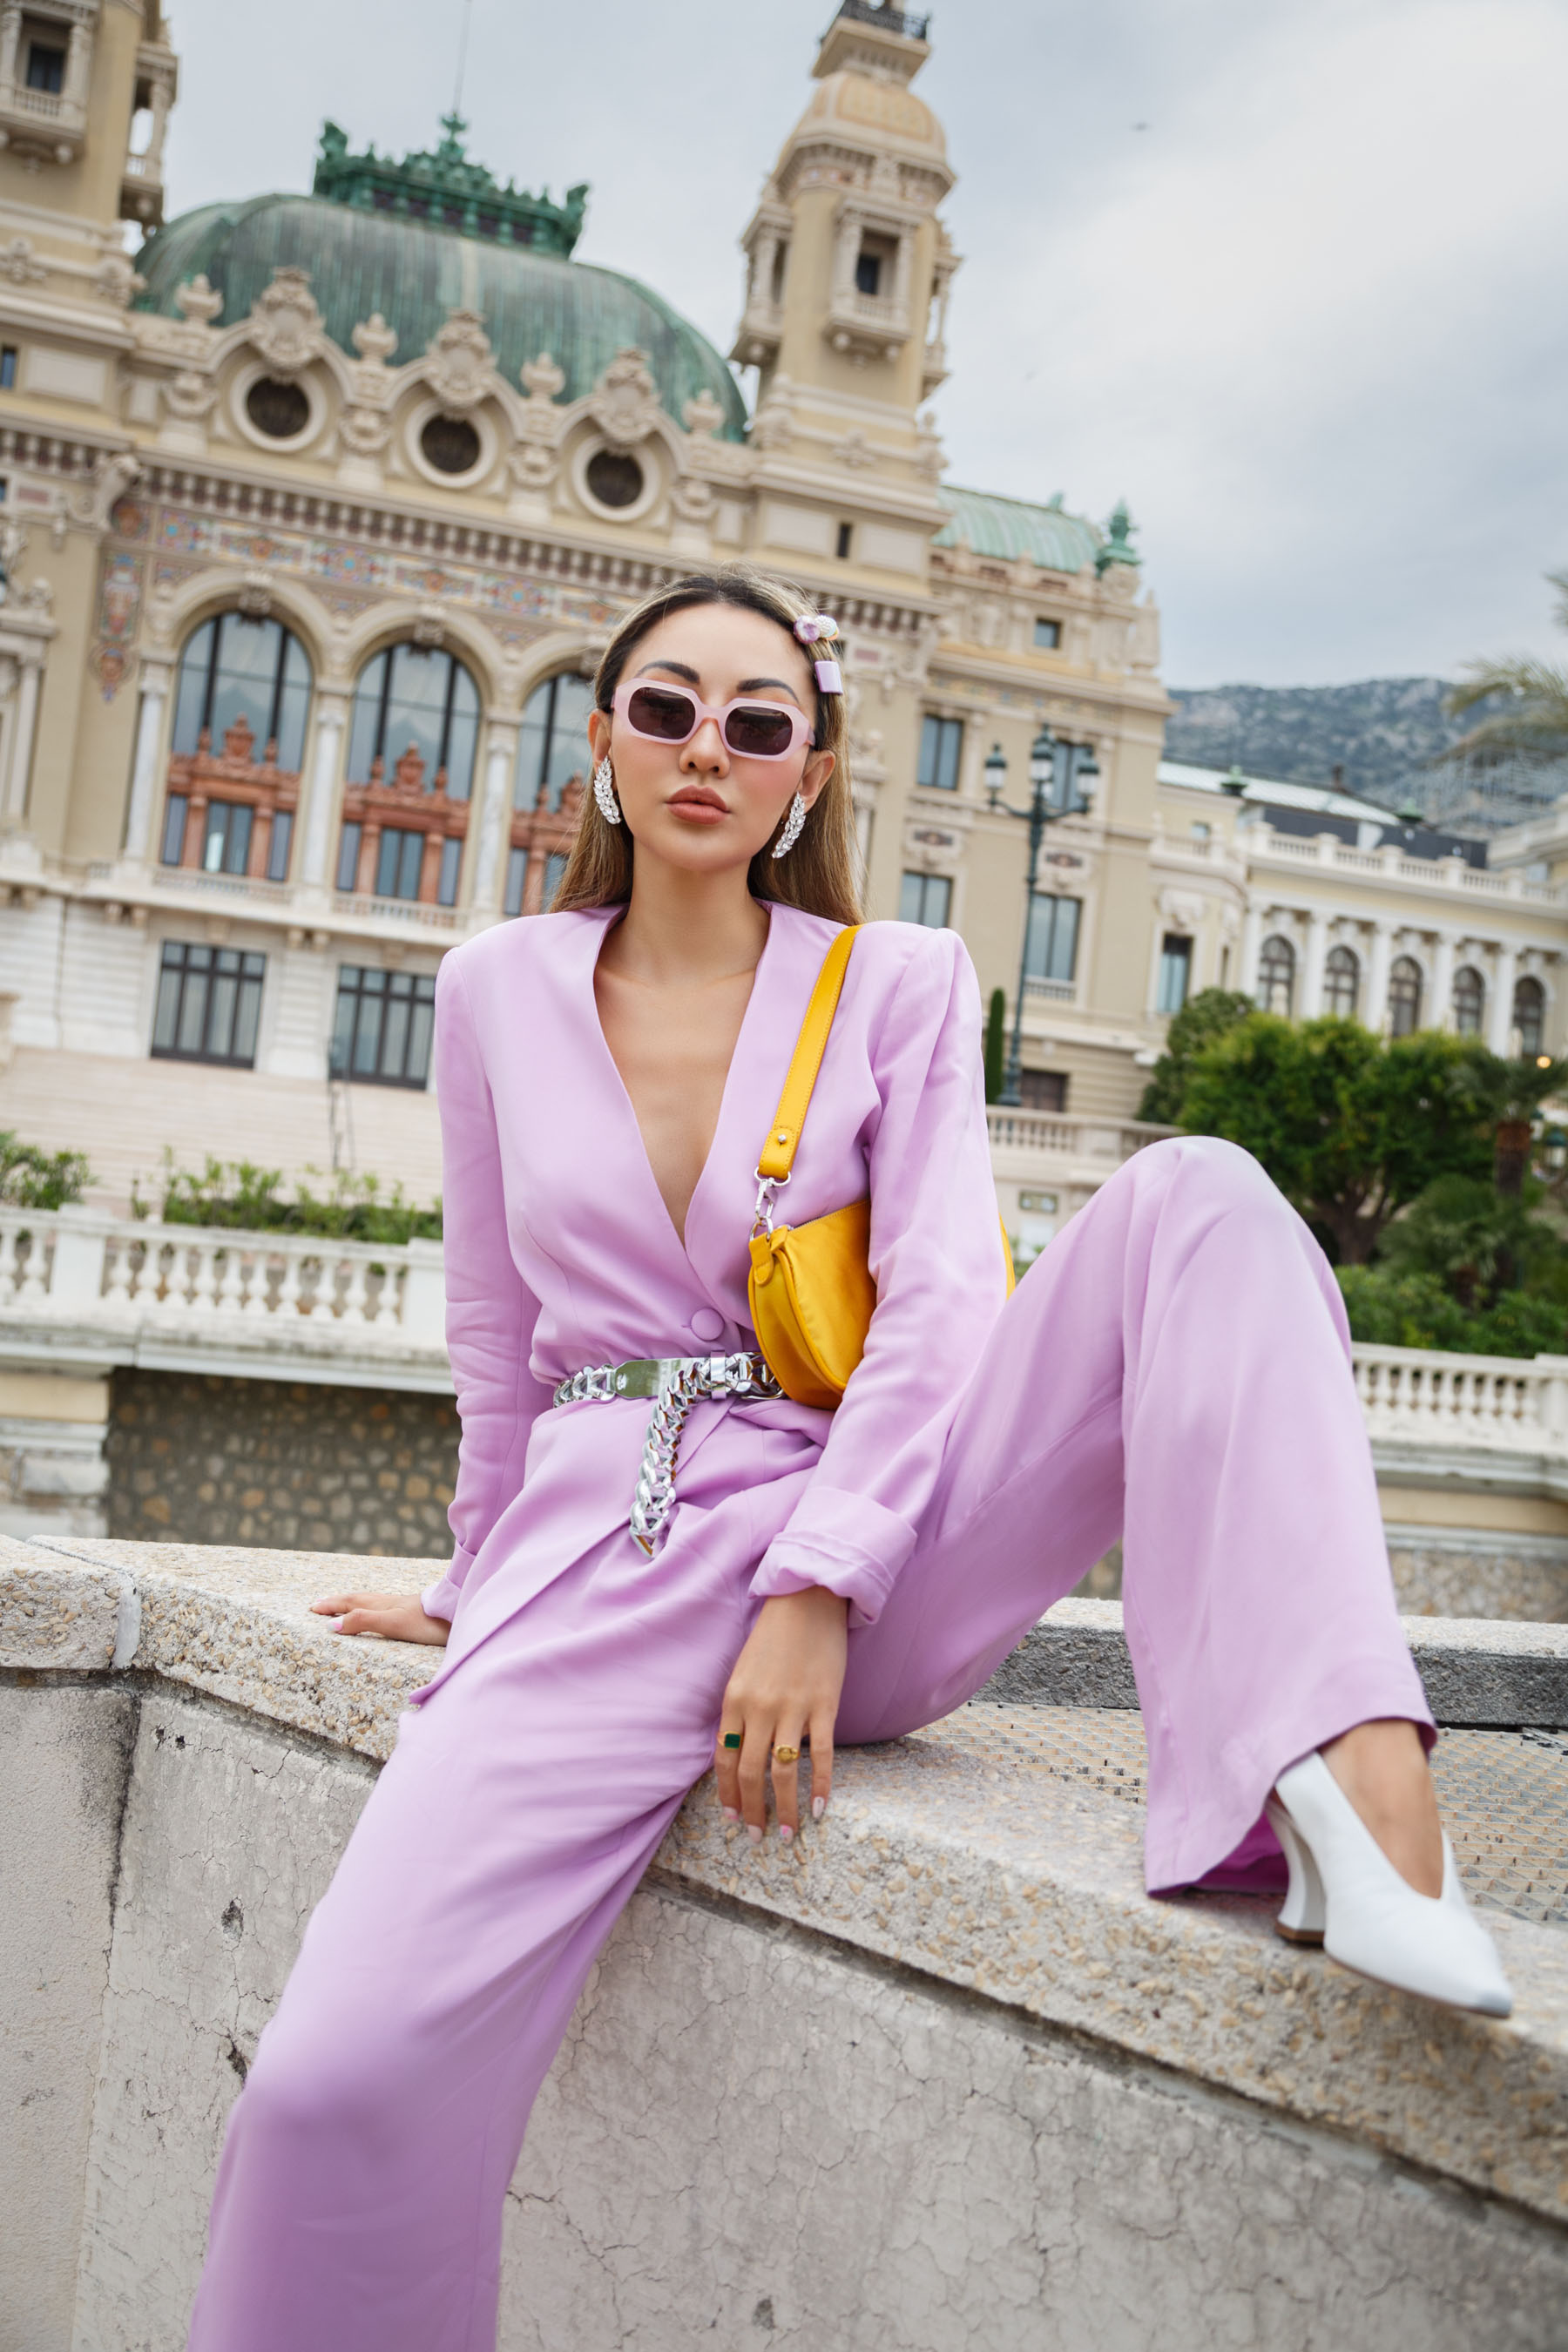 resume tools and tips, lavender suit, power suit trend // Notjessfashion.com